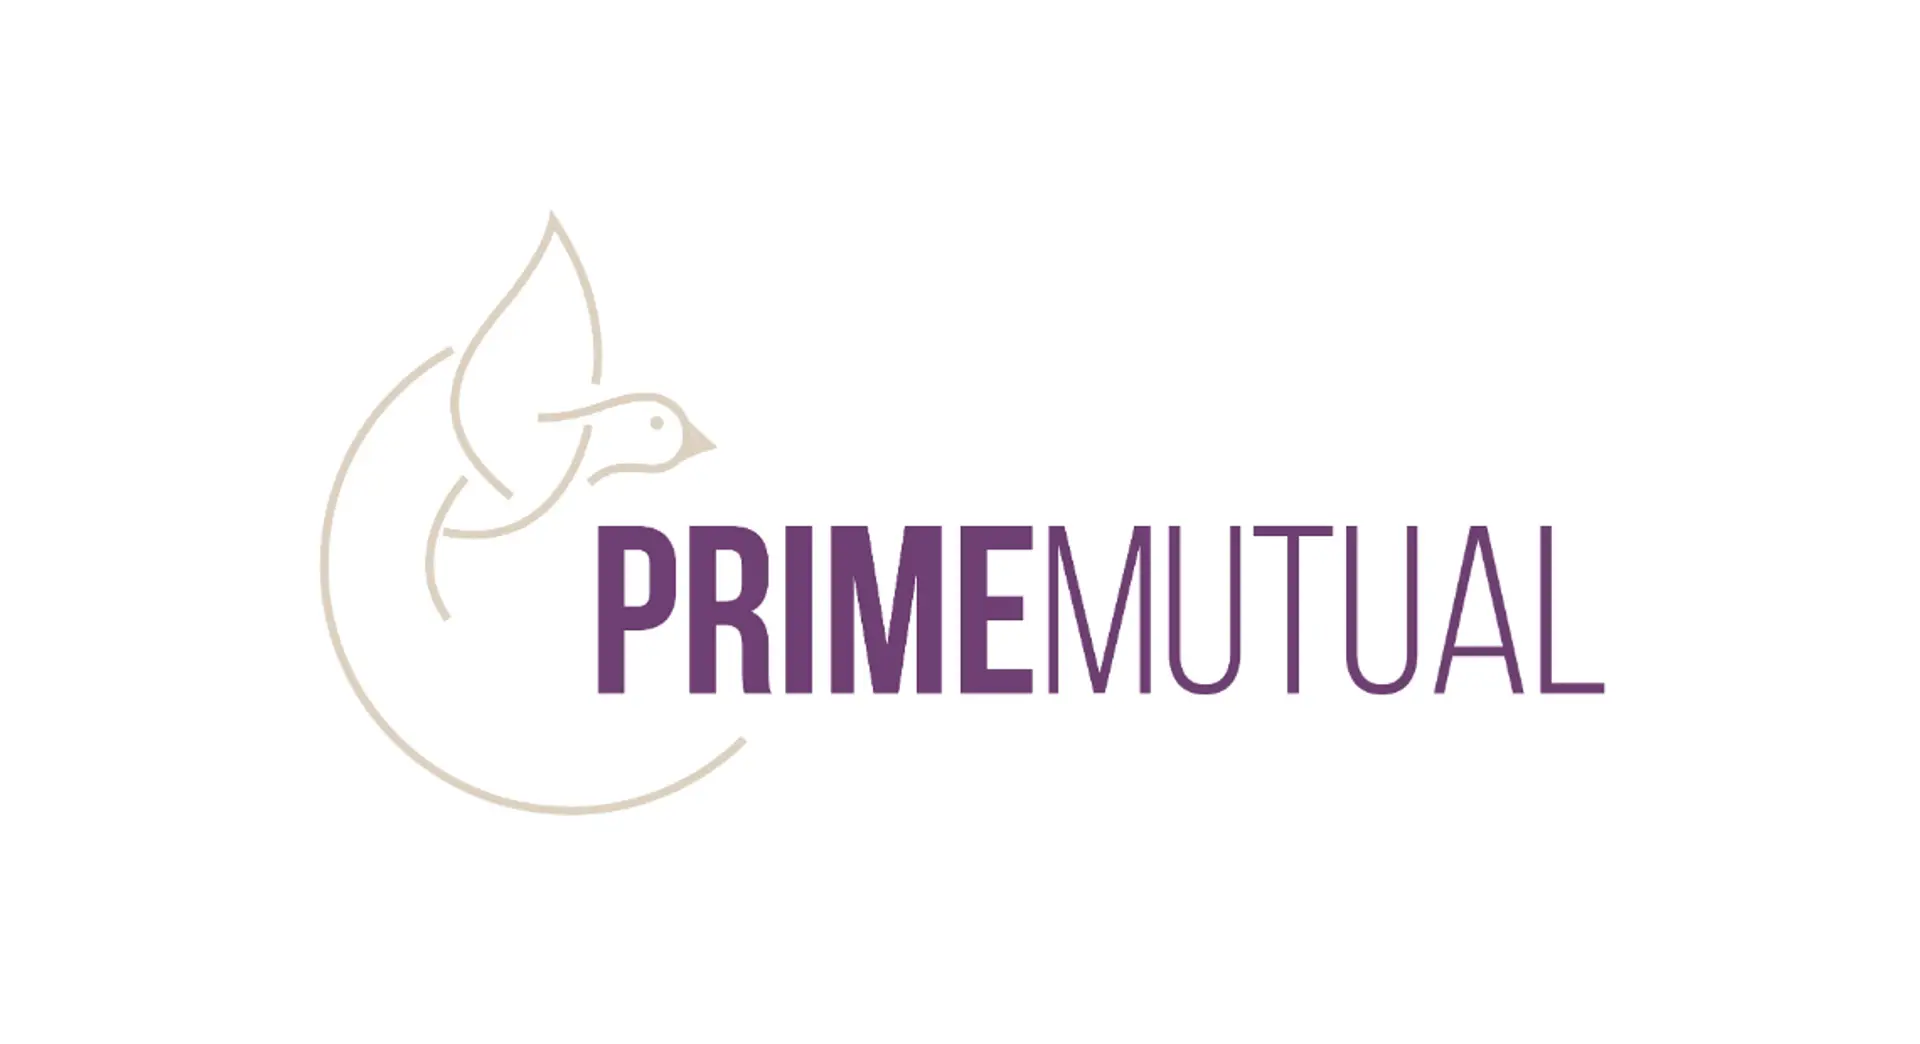 Founders Interview: Ross Quade, Prime Mutual